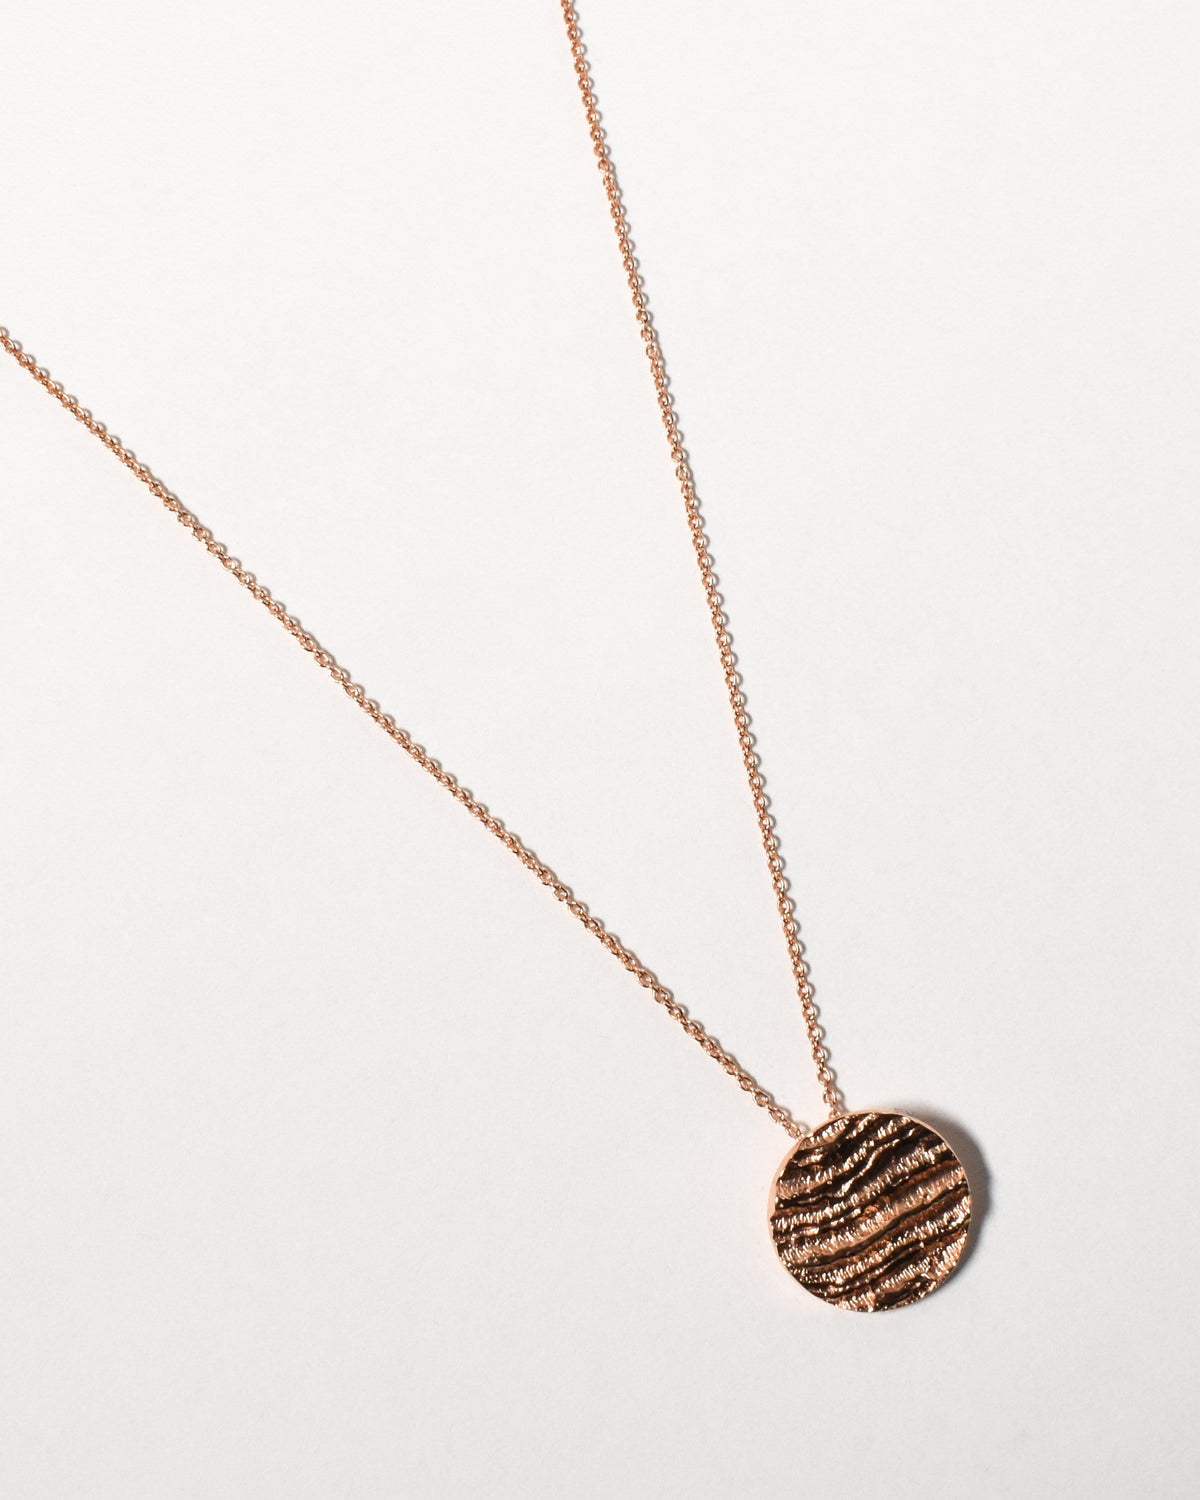 Kutti Necklace, Rose Gold Plated